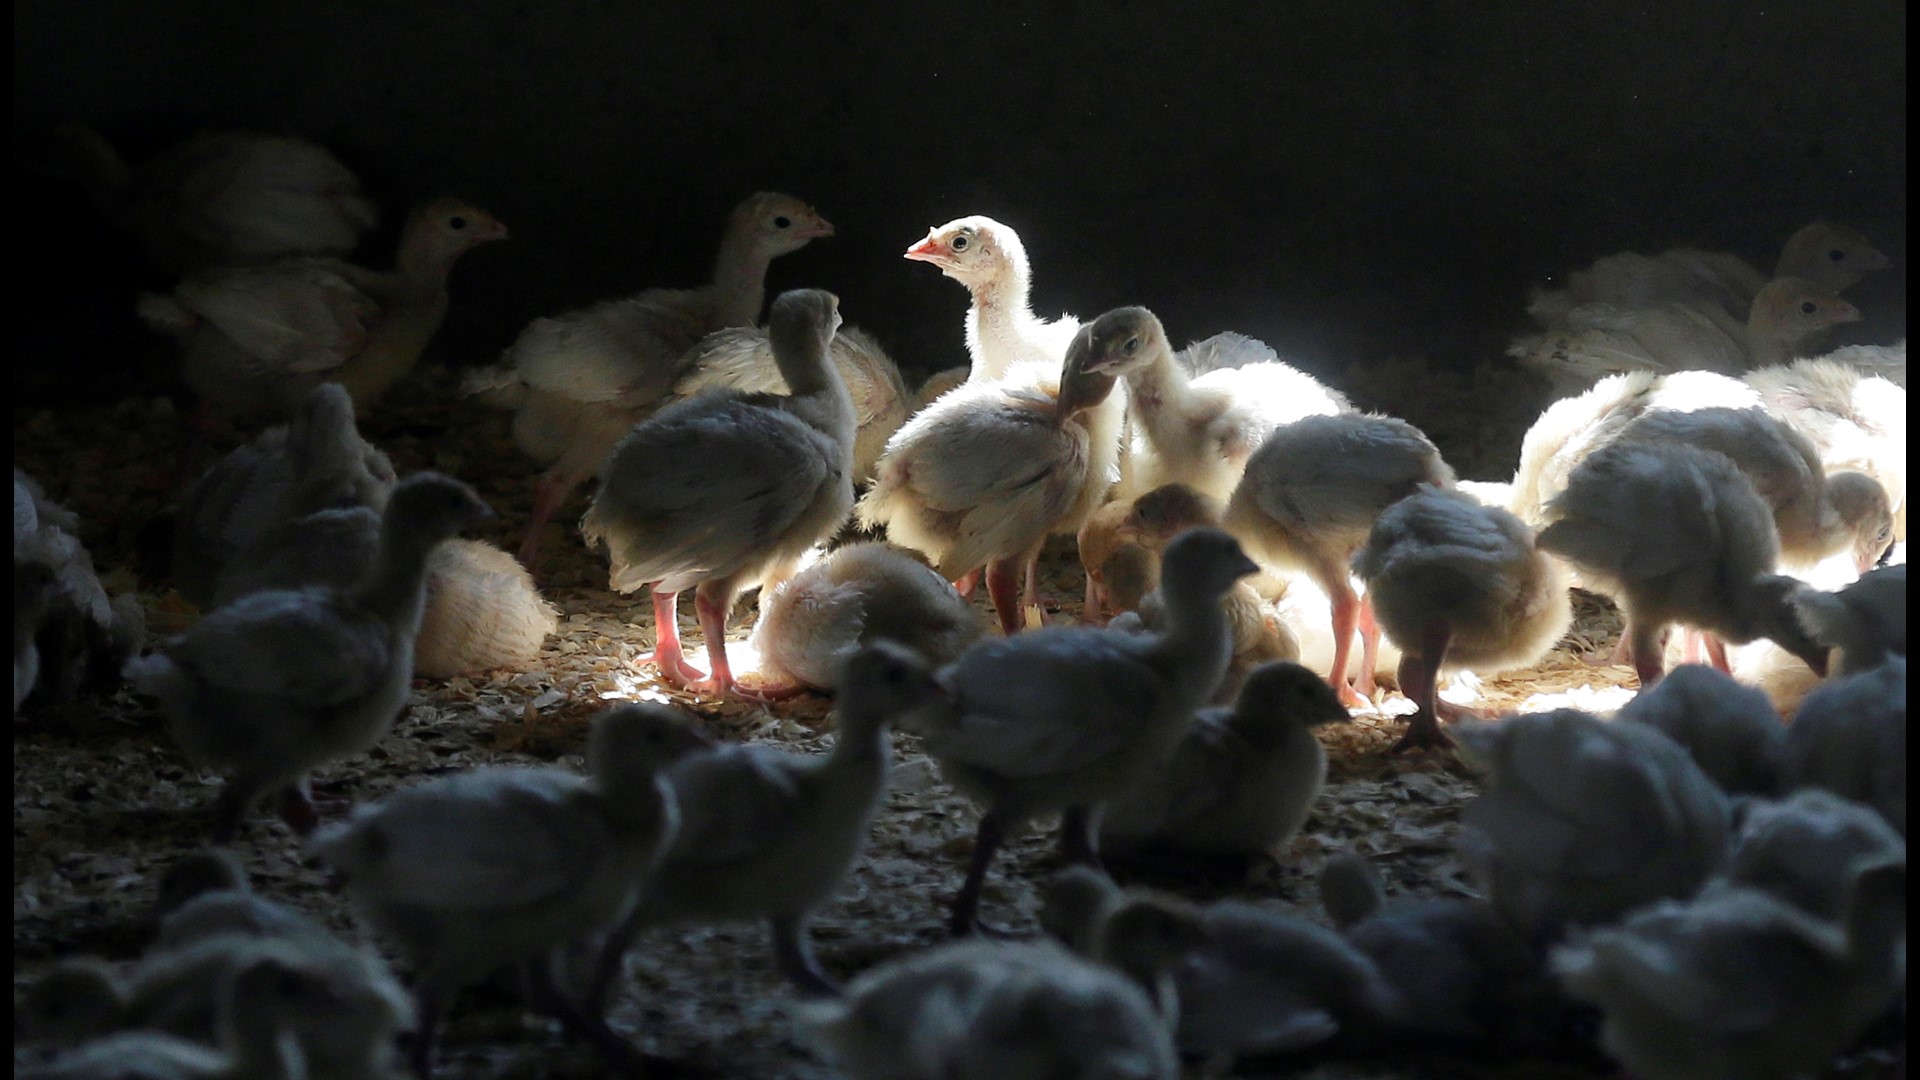 The Pennsylvania Department of Agriculture and other state officials emphasize biosecurity on poultry farms.